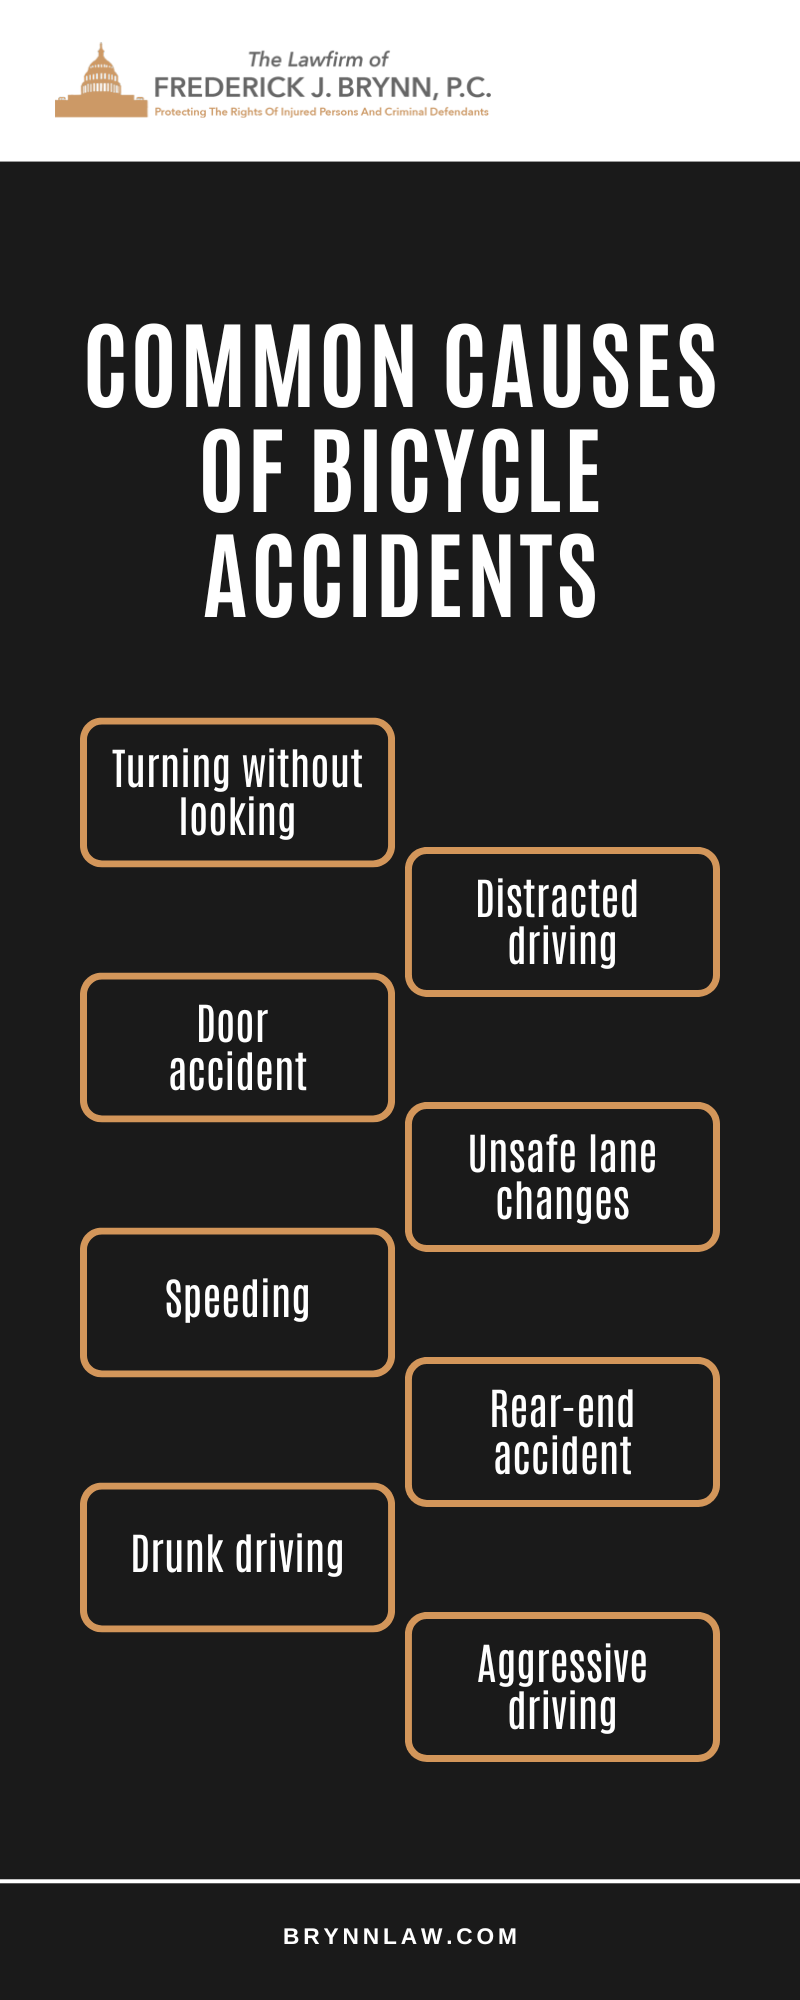 Common Causes Of Bicycle Accidents Infographic